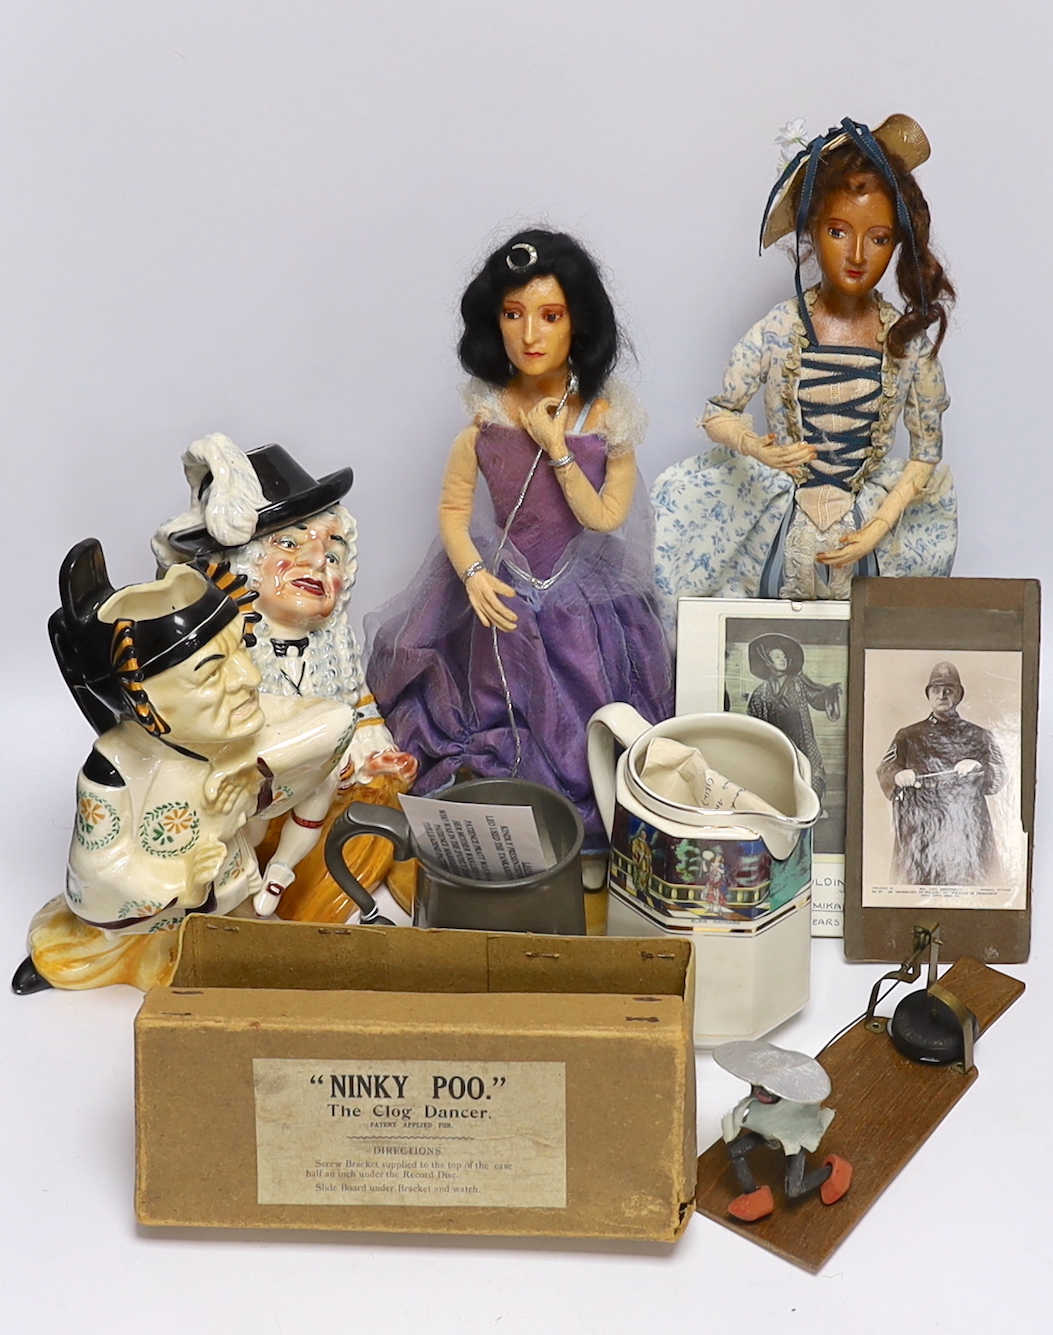 Gilbert & Sullivan and D’Oyly interest; a collection of ceramics, puppets, photographs, etc. including a Nanki Poo Toby jug, a D’Oyly Carte engraved pewter mug, a ‘Ninky Poo’ gramophone operated Clog Dancer, etc.        